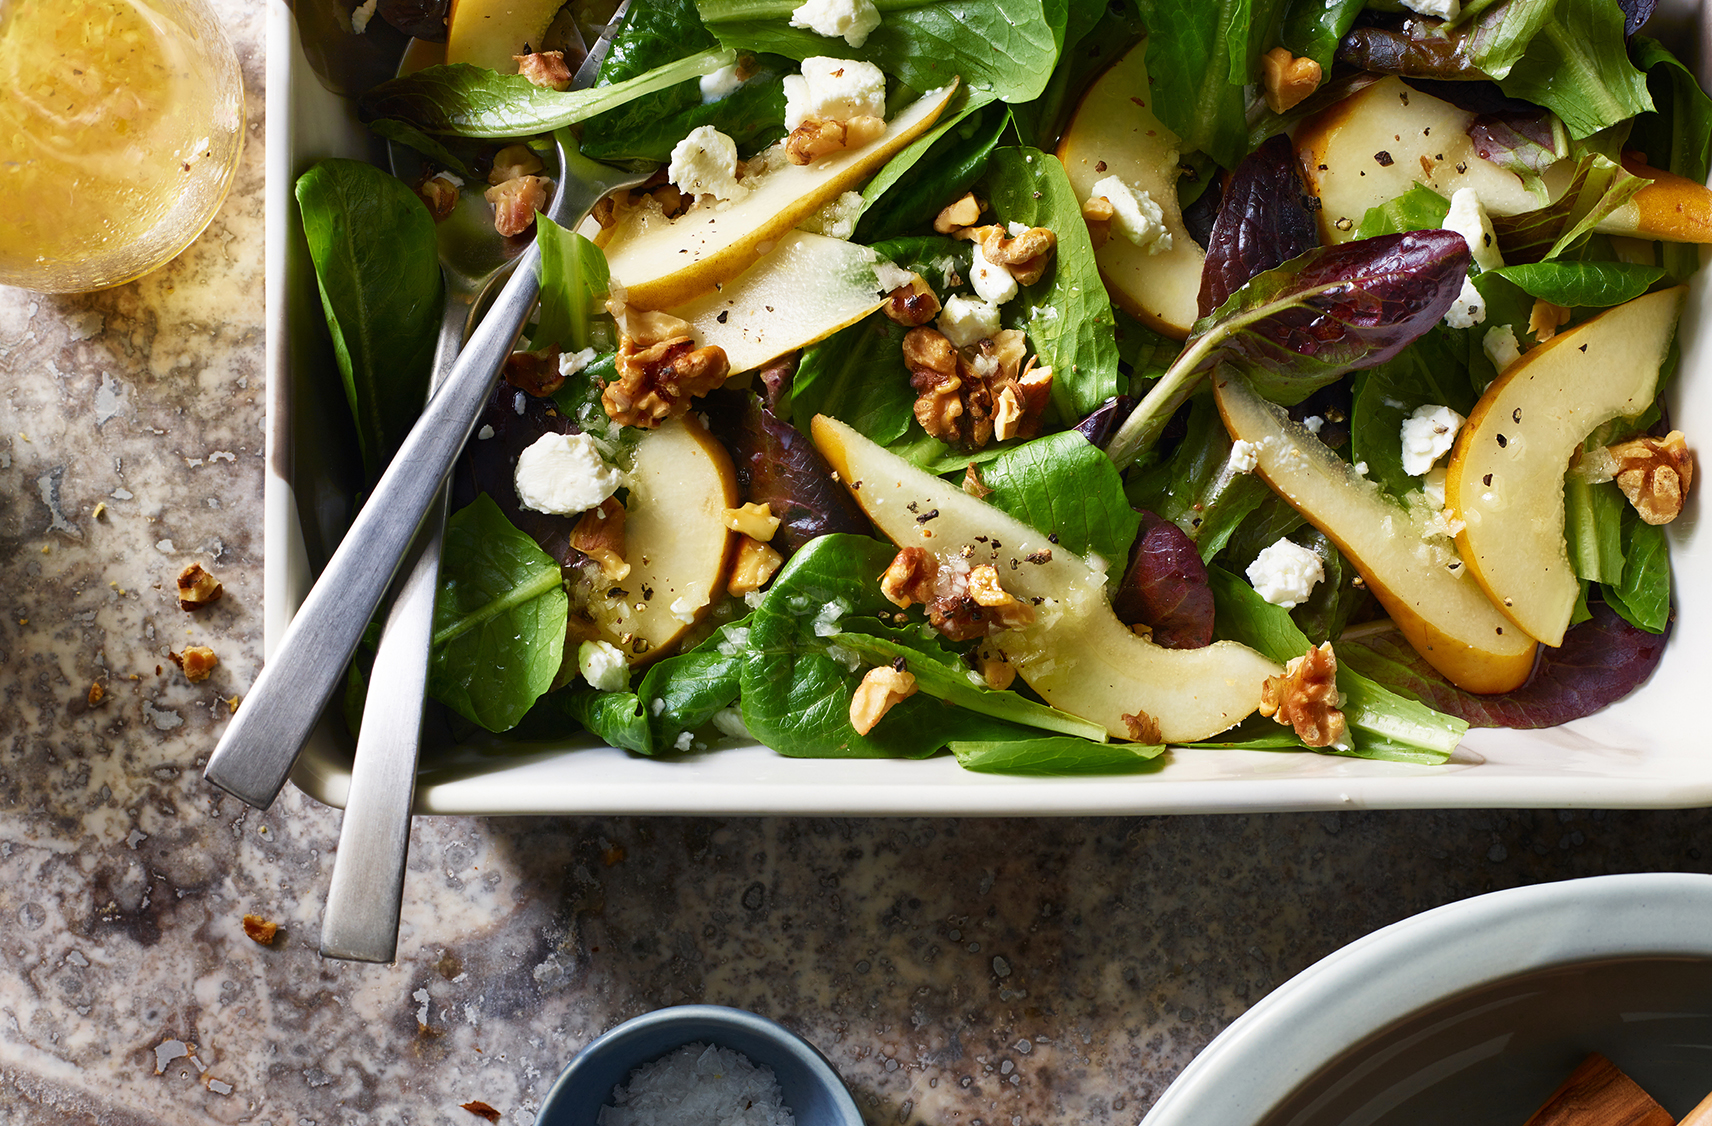 A salad with wild greens, pear slices and crushed pieces of walnuts on top in a serving dish with 2 utensils
